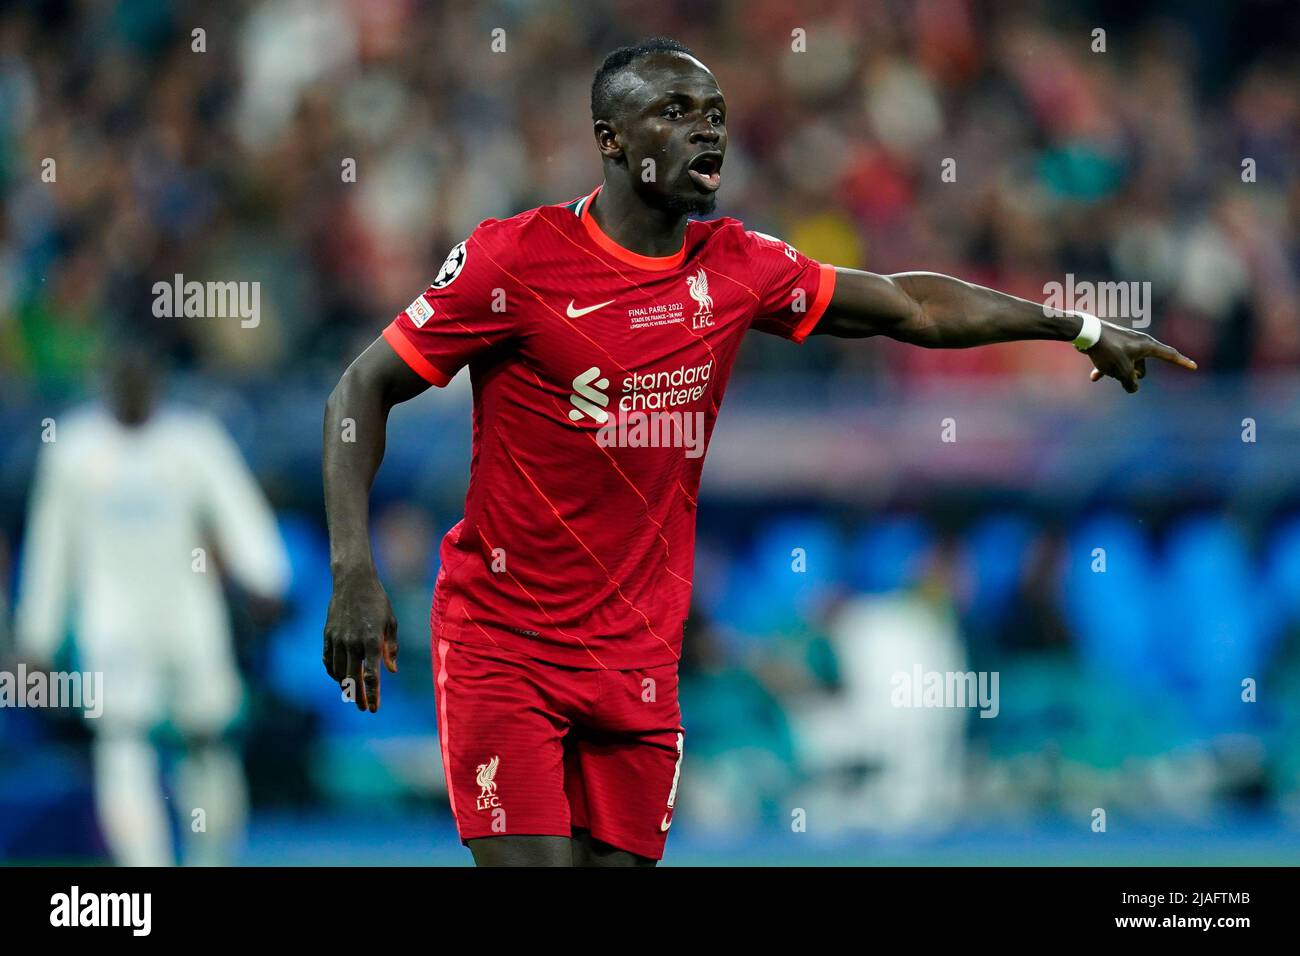 Sadio Mane of Liverpool FC during the UEFA Champions League Final match between Liverpool FC and Real Madrid played at Stade de France on May 28, 2022 in Paris, France. (Photo / Magma) Stock Photo